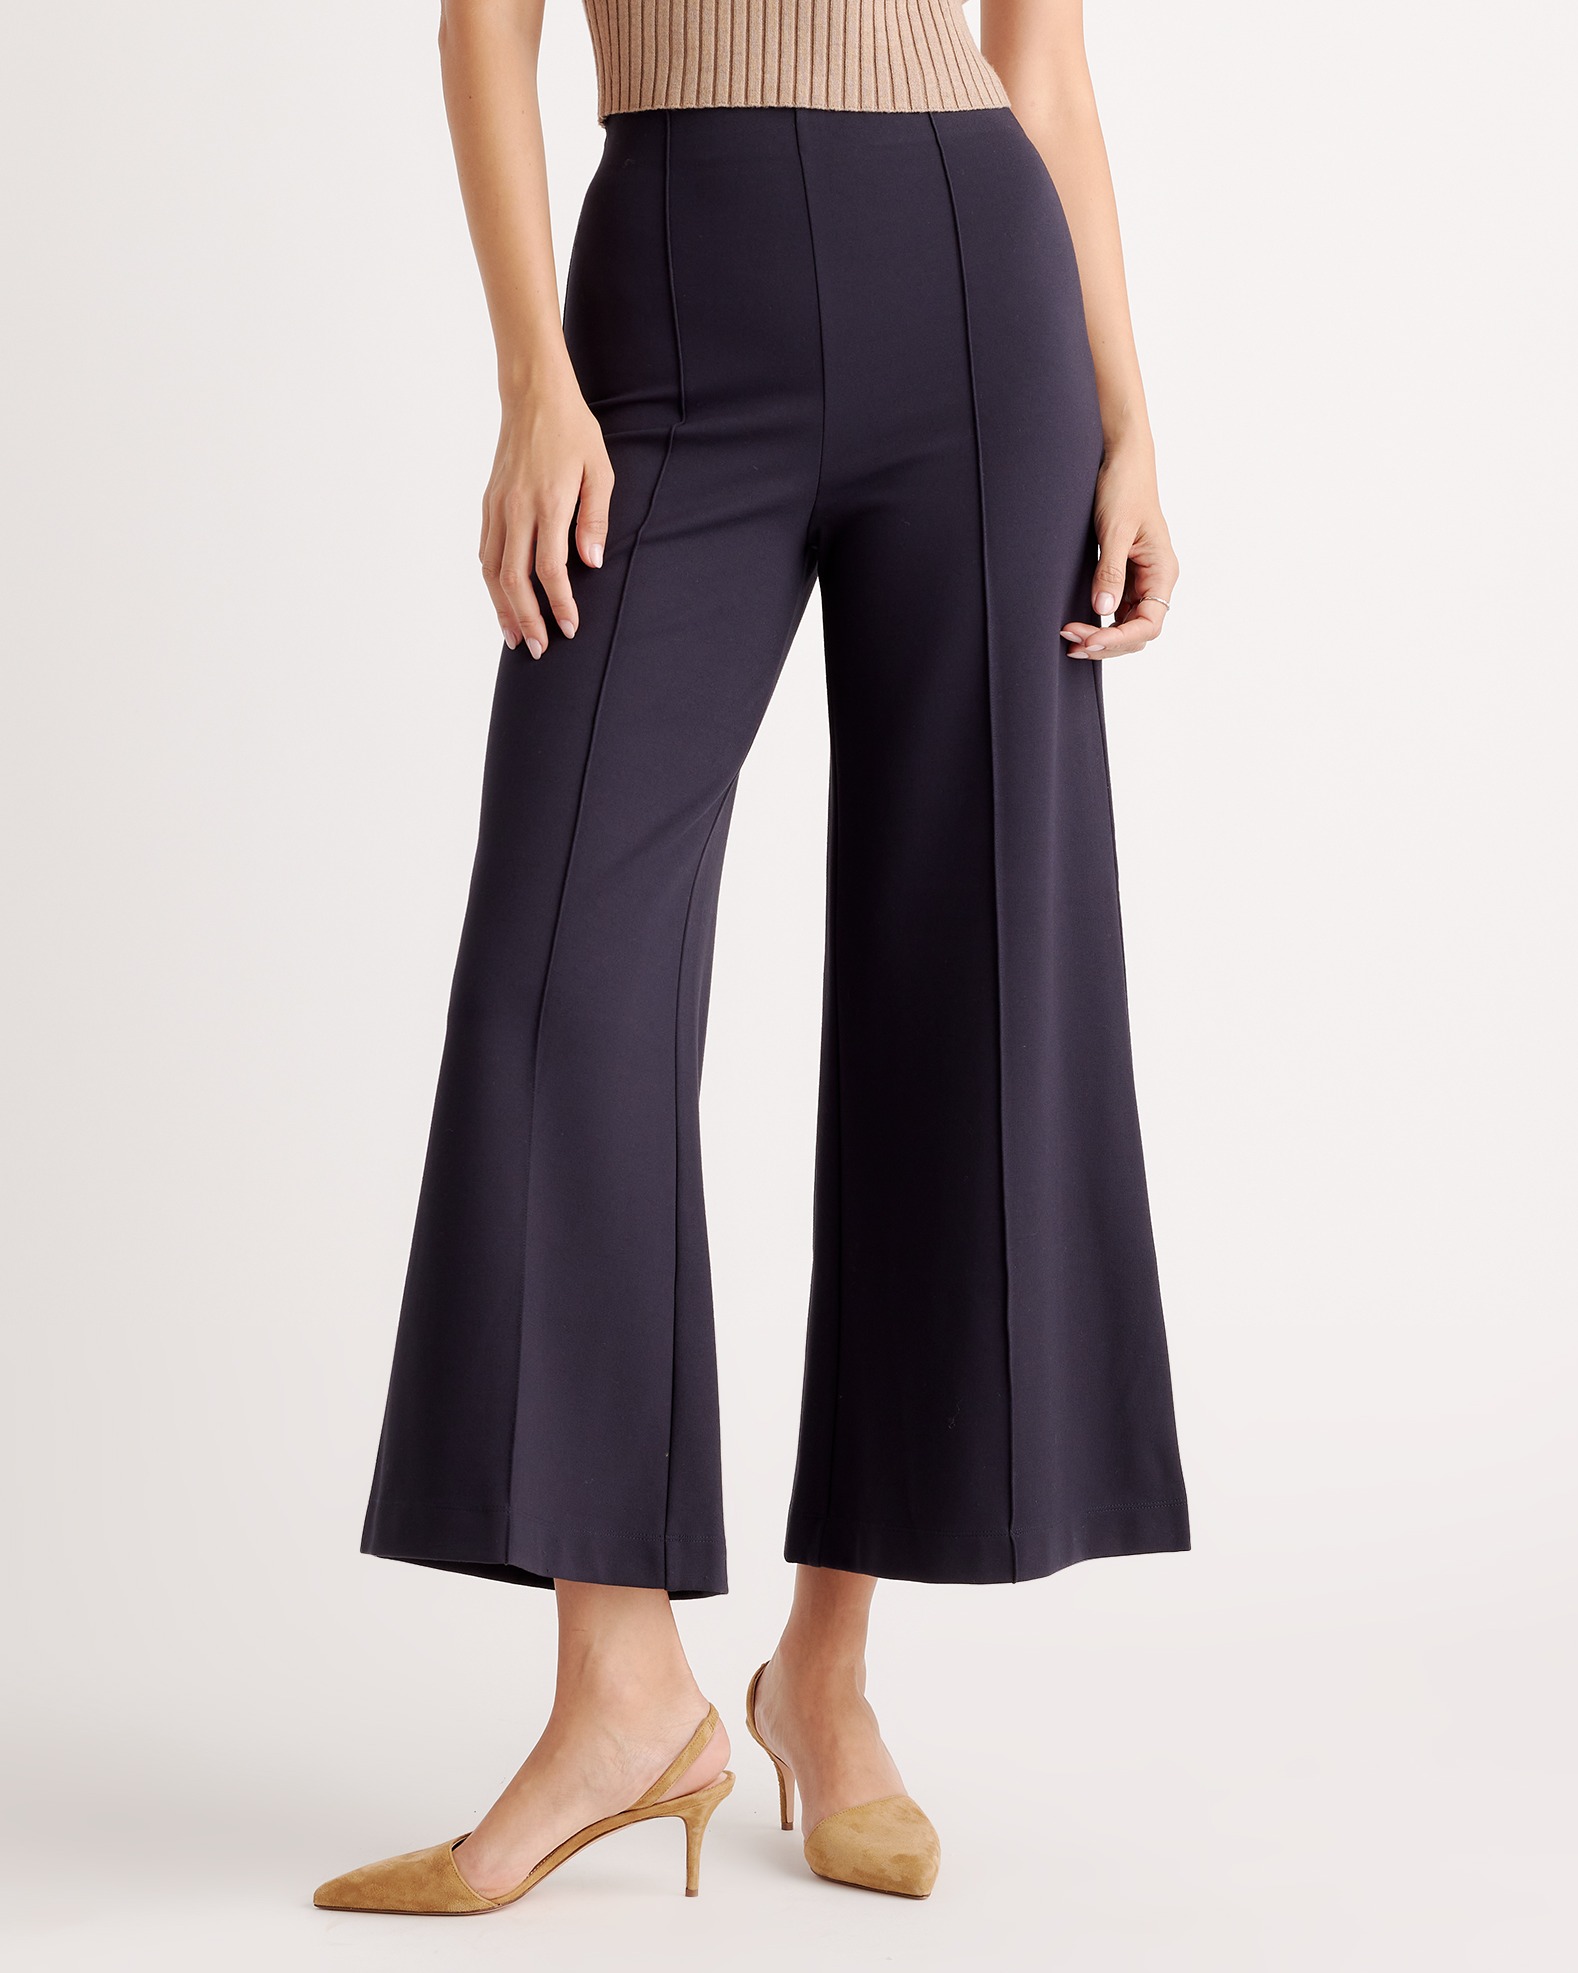 Quince Ultra Stretch Ponte Cropped Wide Leg Pant - Choose Size & Color -  NWT